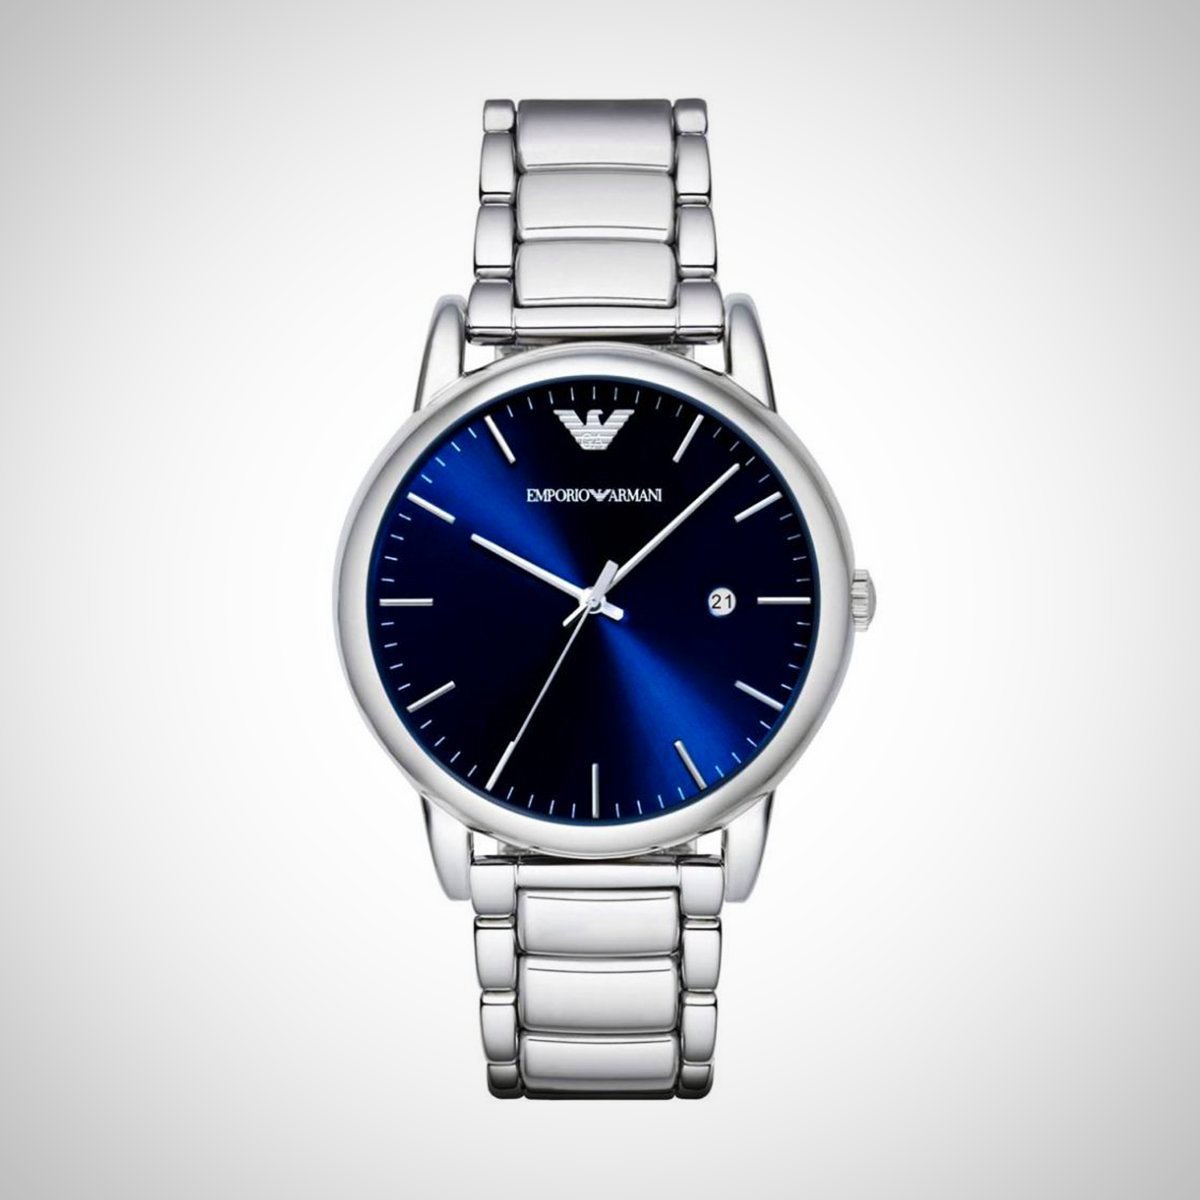 Image of Emporio Armani AR8033 Men's Stainless Steel Watch